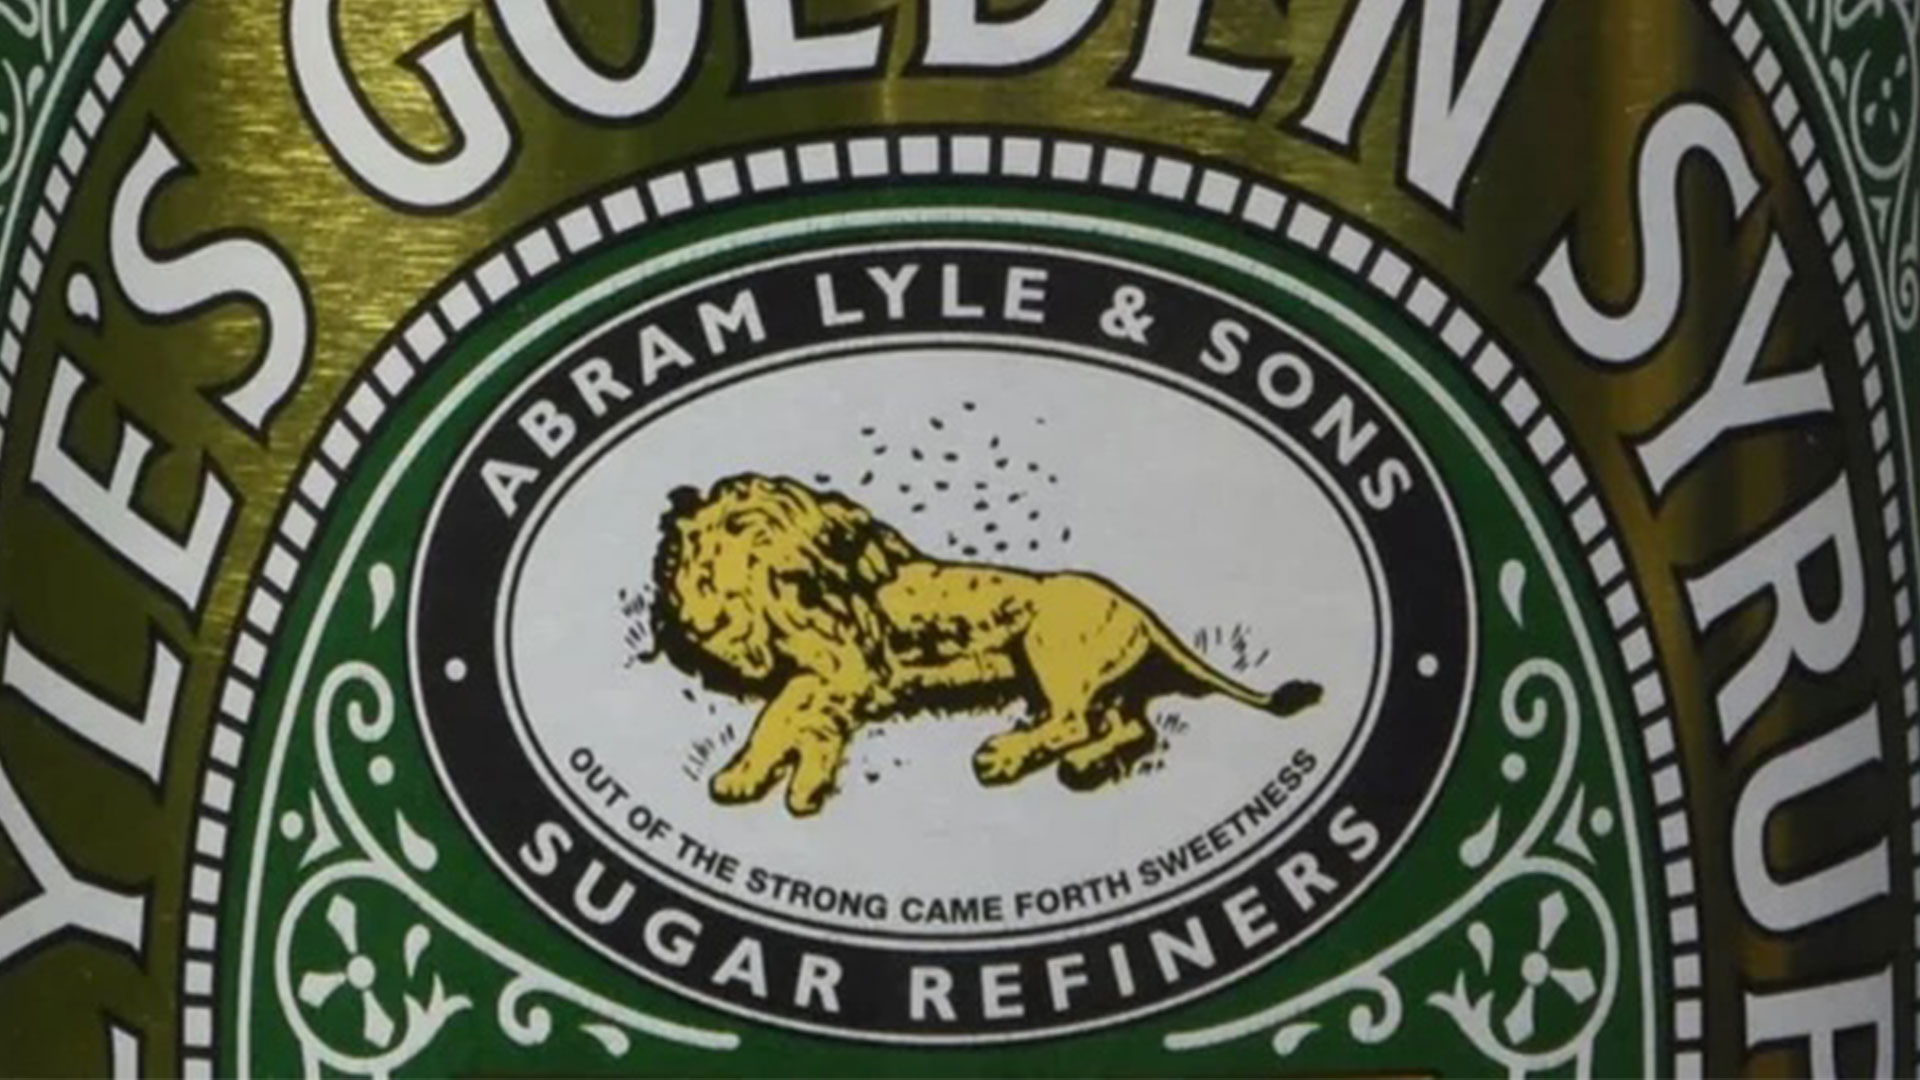 What’s the һƷ̳̽story behind Lyle’s Golden Syrup?